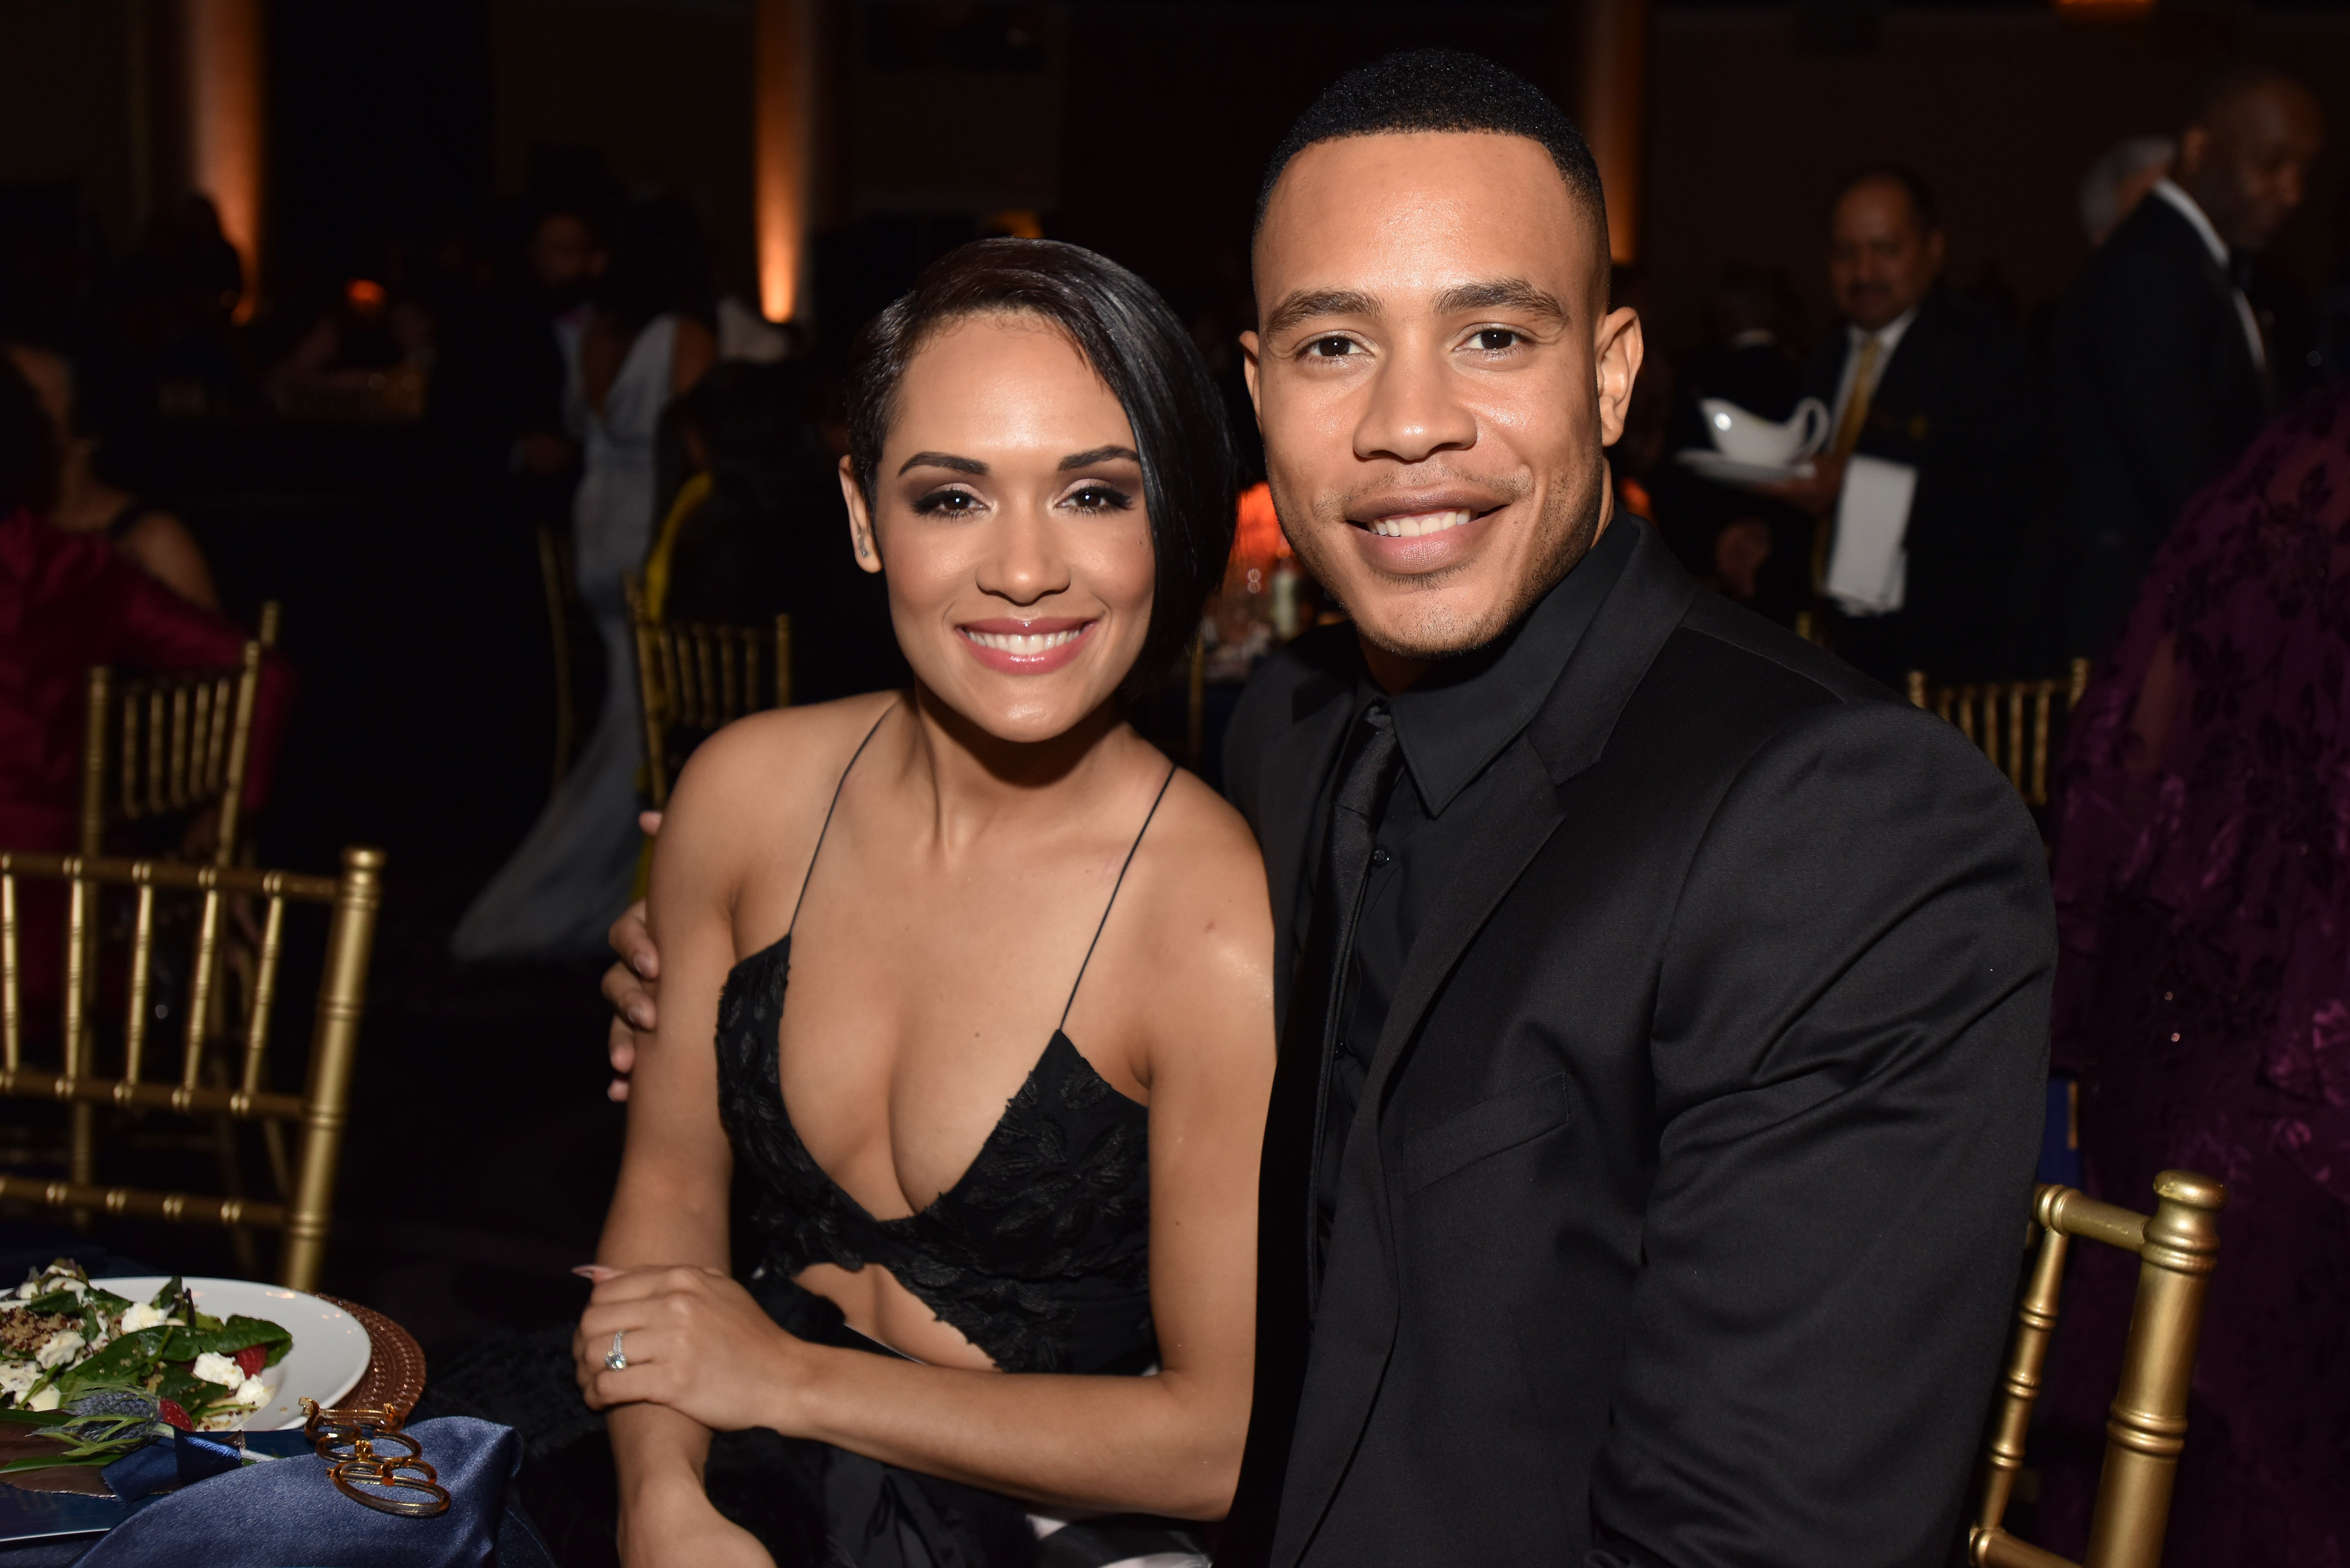 Grace Gealey & Trai Byers attend BET Presents the American Black Film Festival Honors on Feb. 17, 2017 in California | Photo: Getty Images